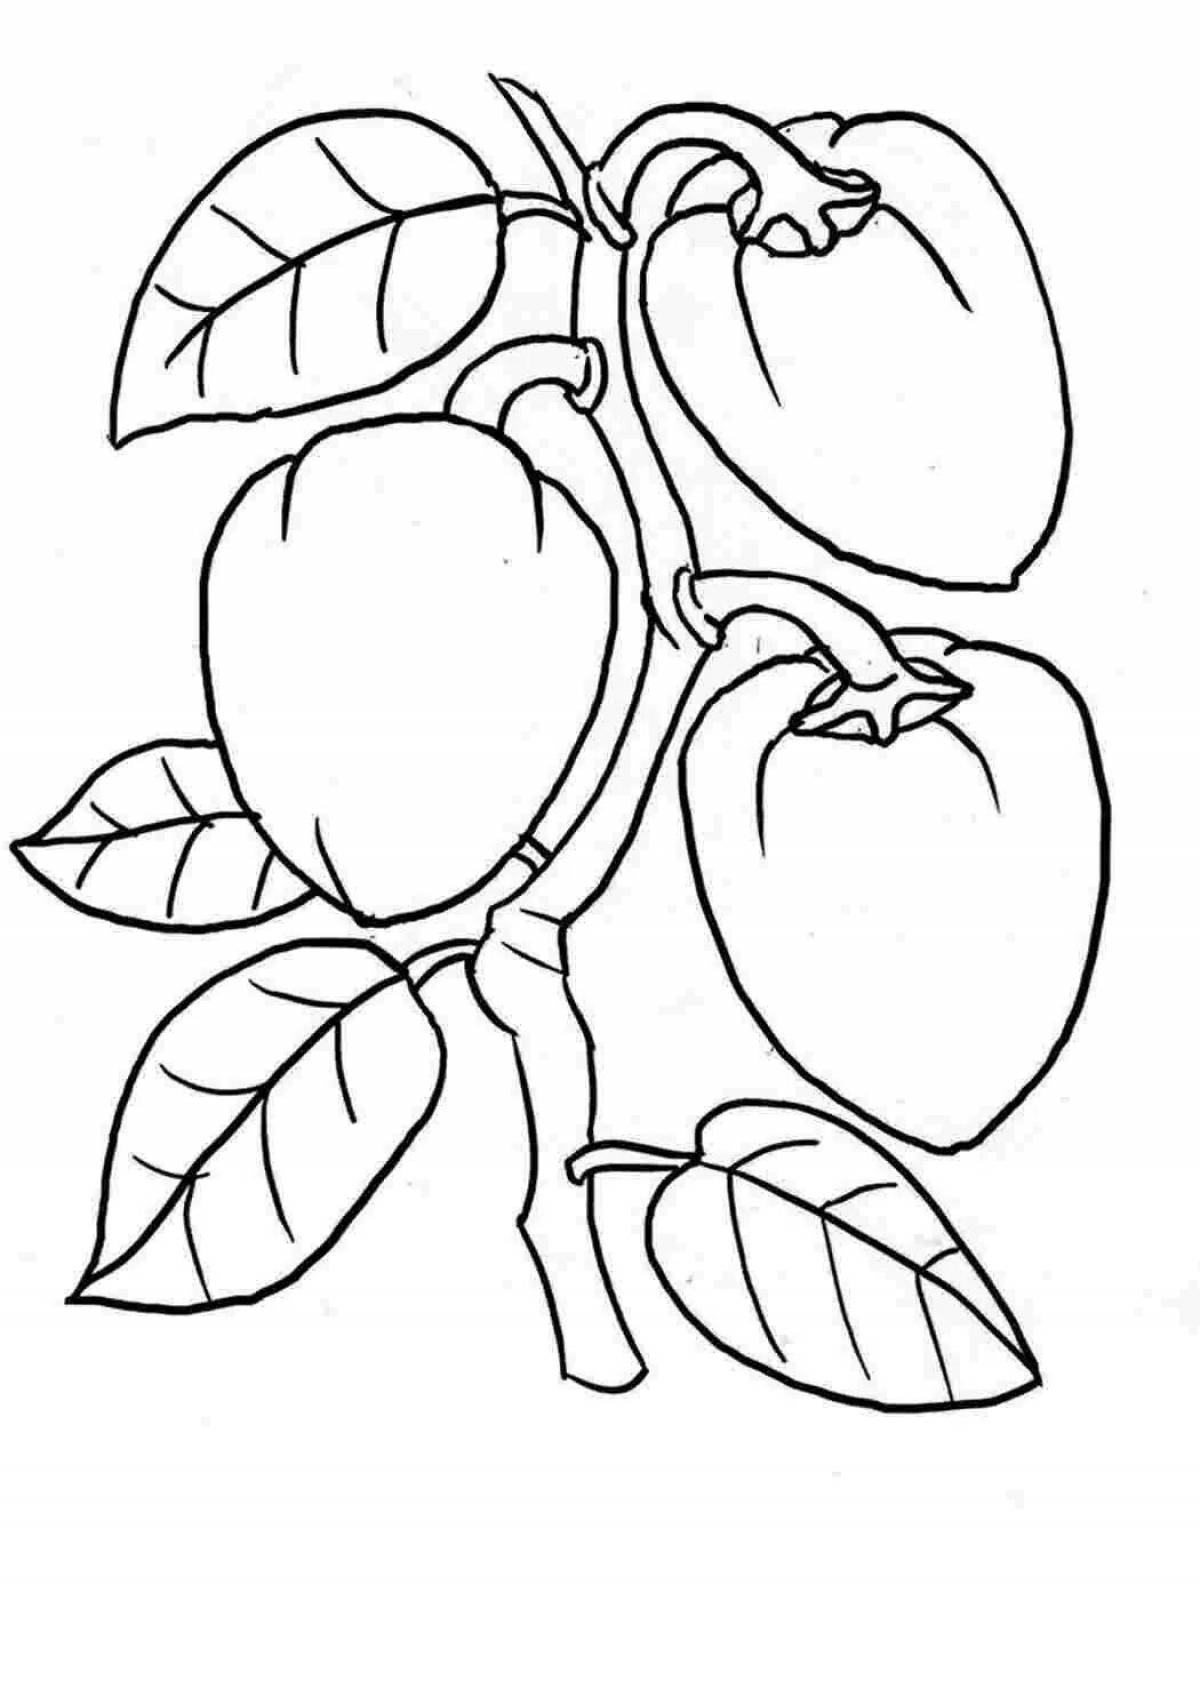 Fat pepper coloring book for kids